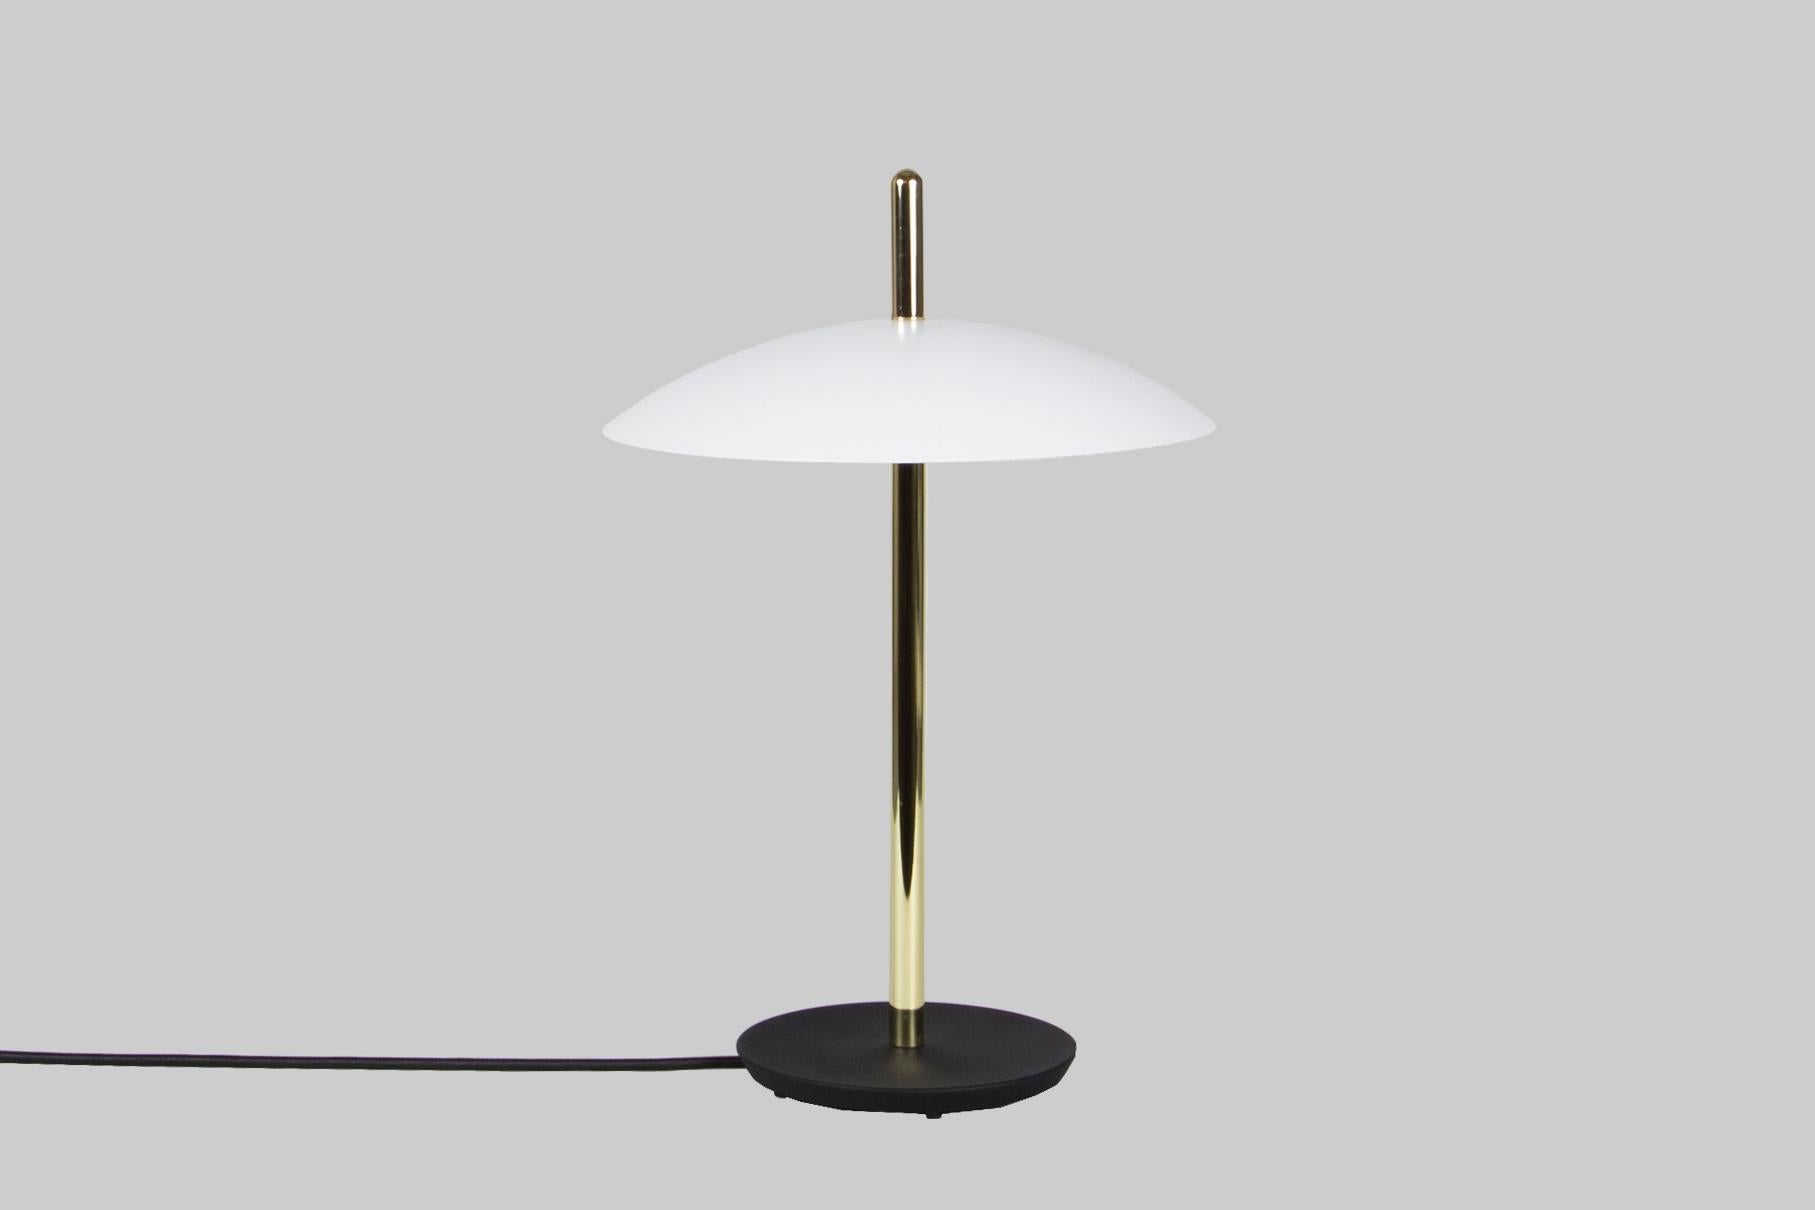 Powder-Coated Signal Table Lamp from Souda, Black and Brass, Made to Order For Sale